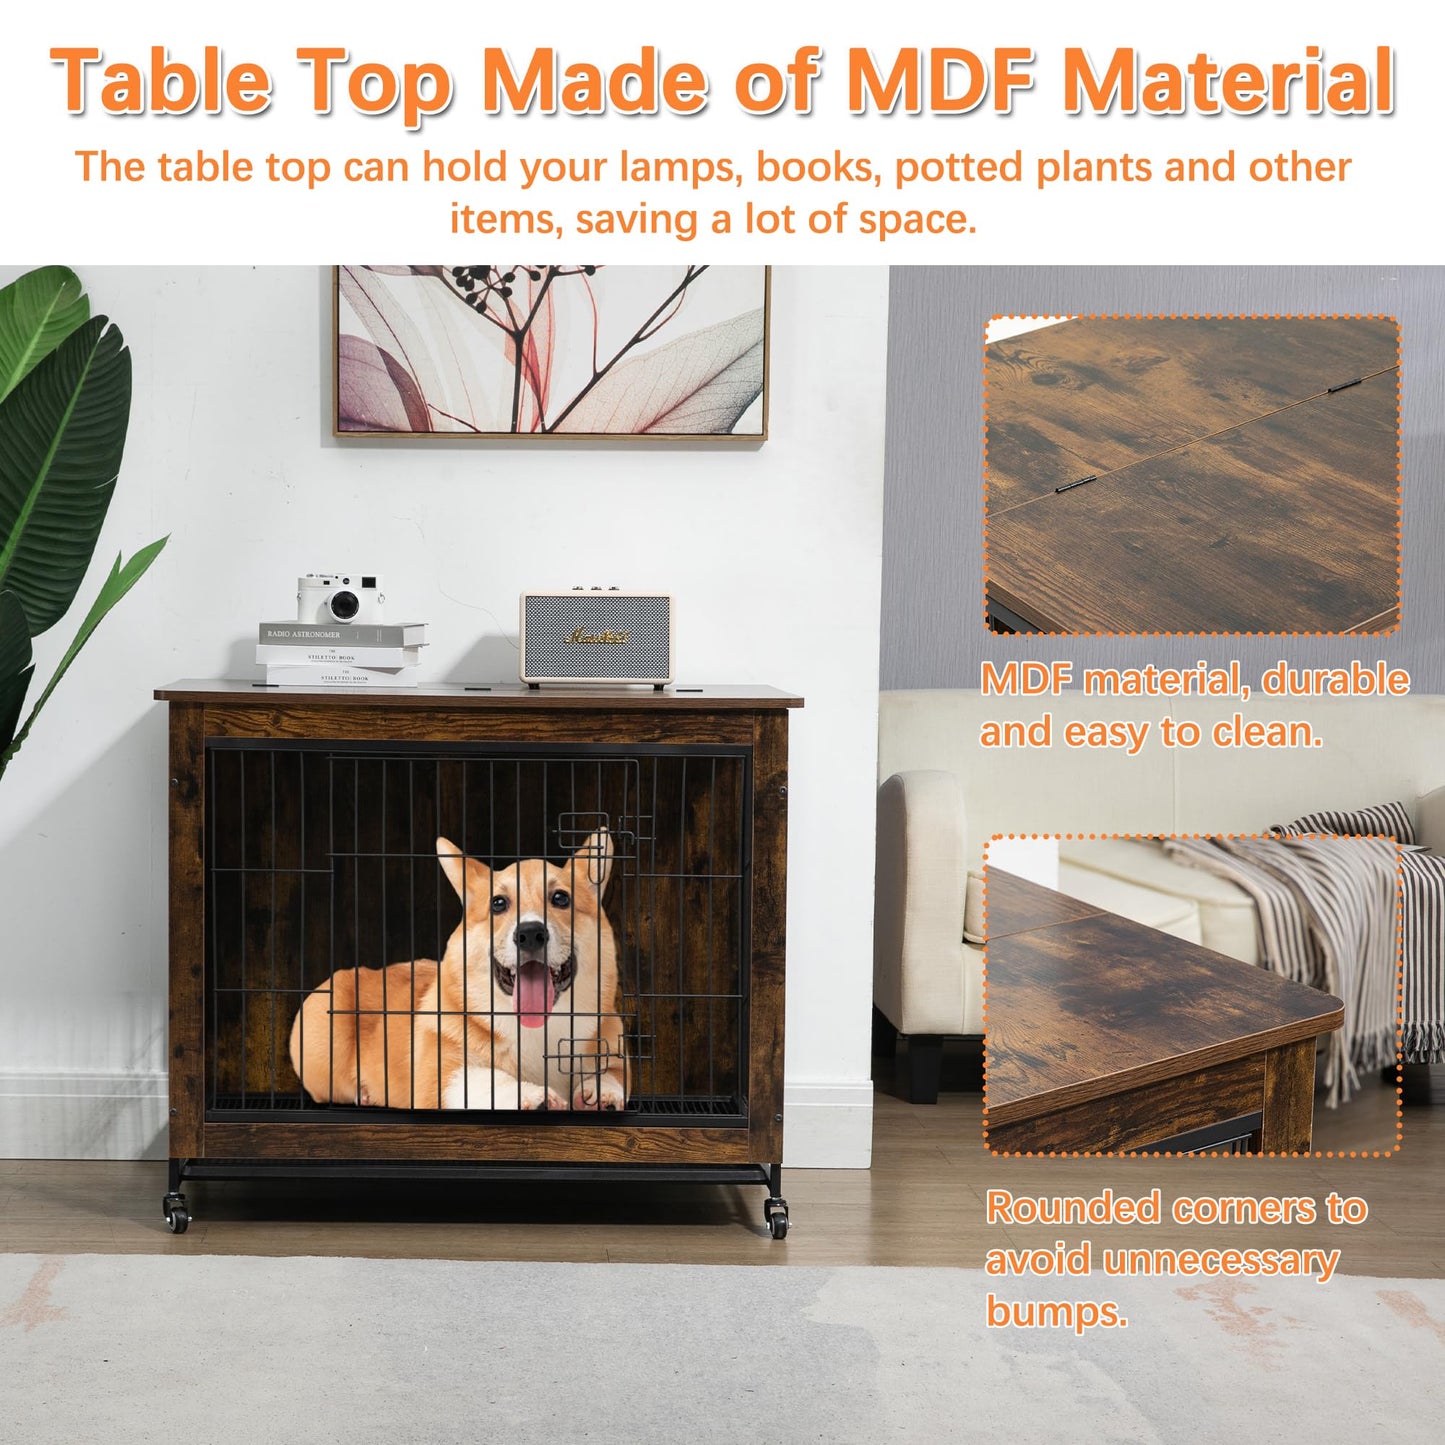 Dog Crate Furniture with Pull-Out Removable Tray, 23.6” Double-Door Dog Crate for Small to Large Dogs, Wooden Dog Kennel Table with Lockable Wheels, End Table Dog House, Dog Cage Indoor, Brown